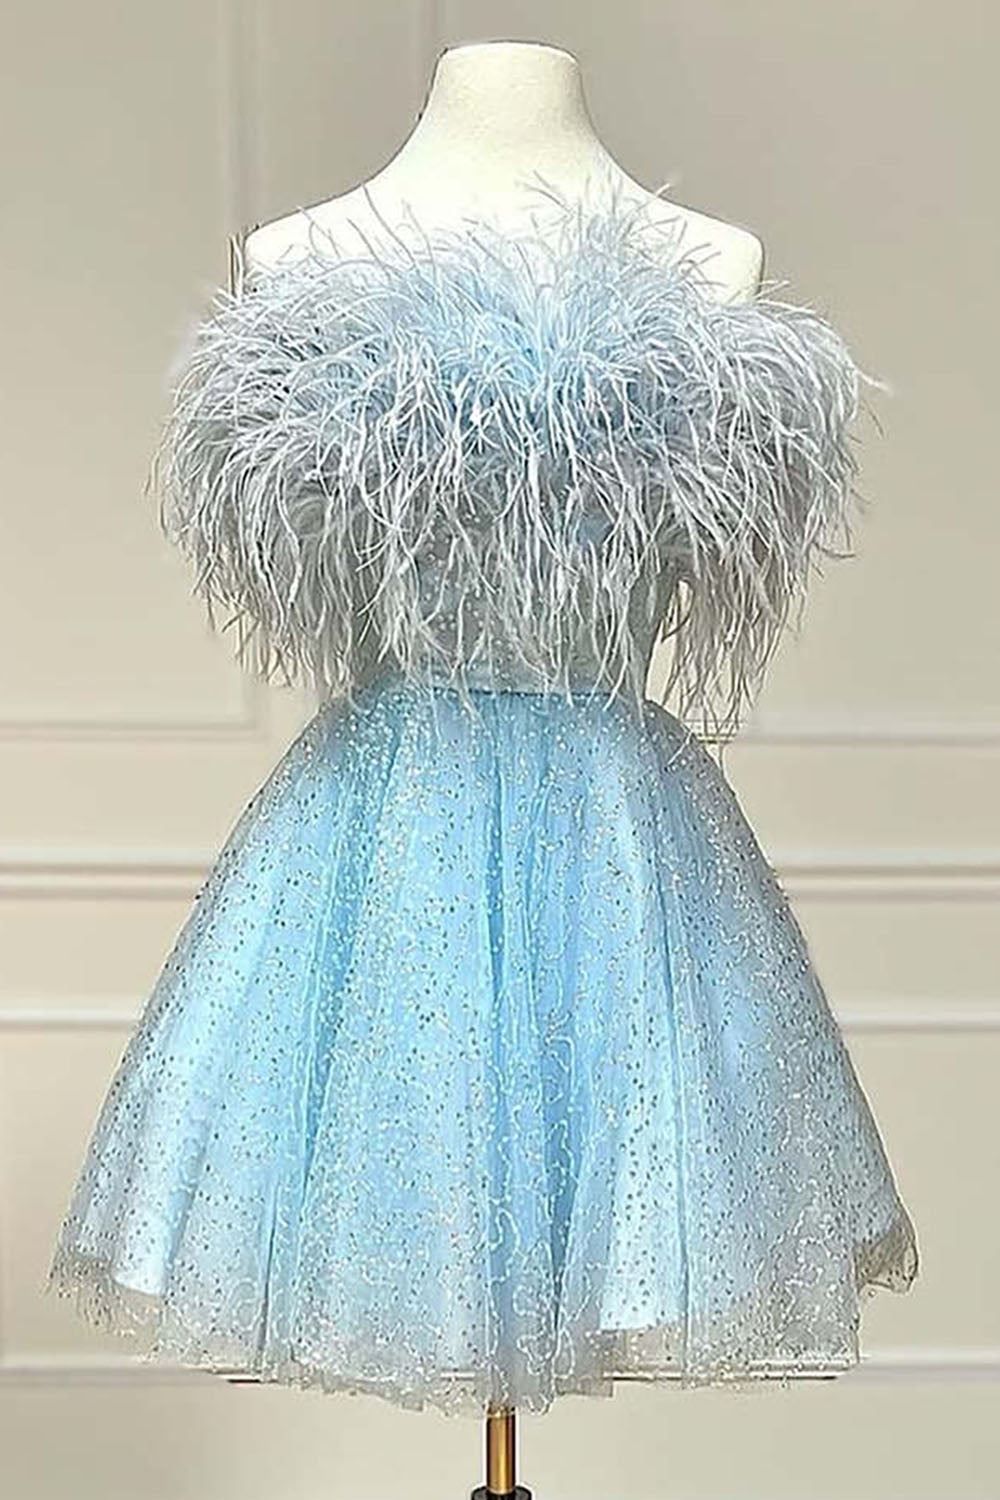 Homecoming Dresses Blue, Light Blue A-Line Strapless Homecoming Dress with Feathers